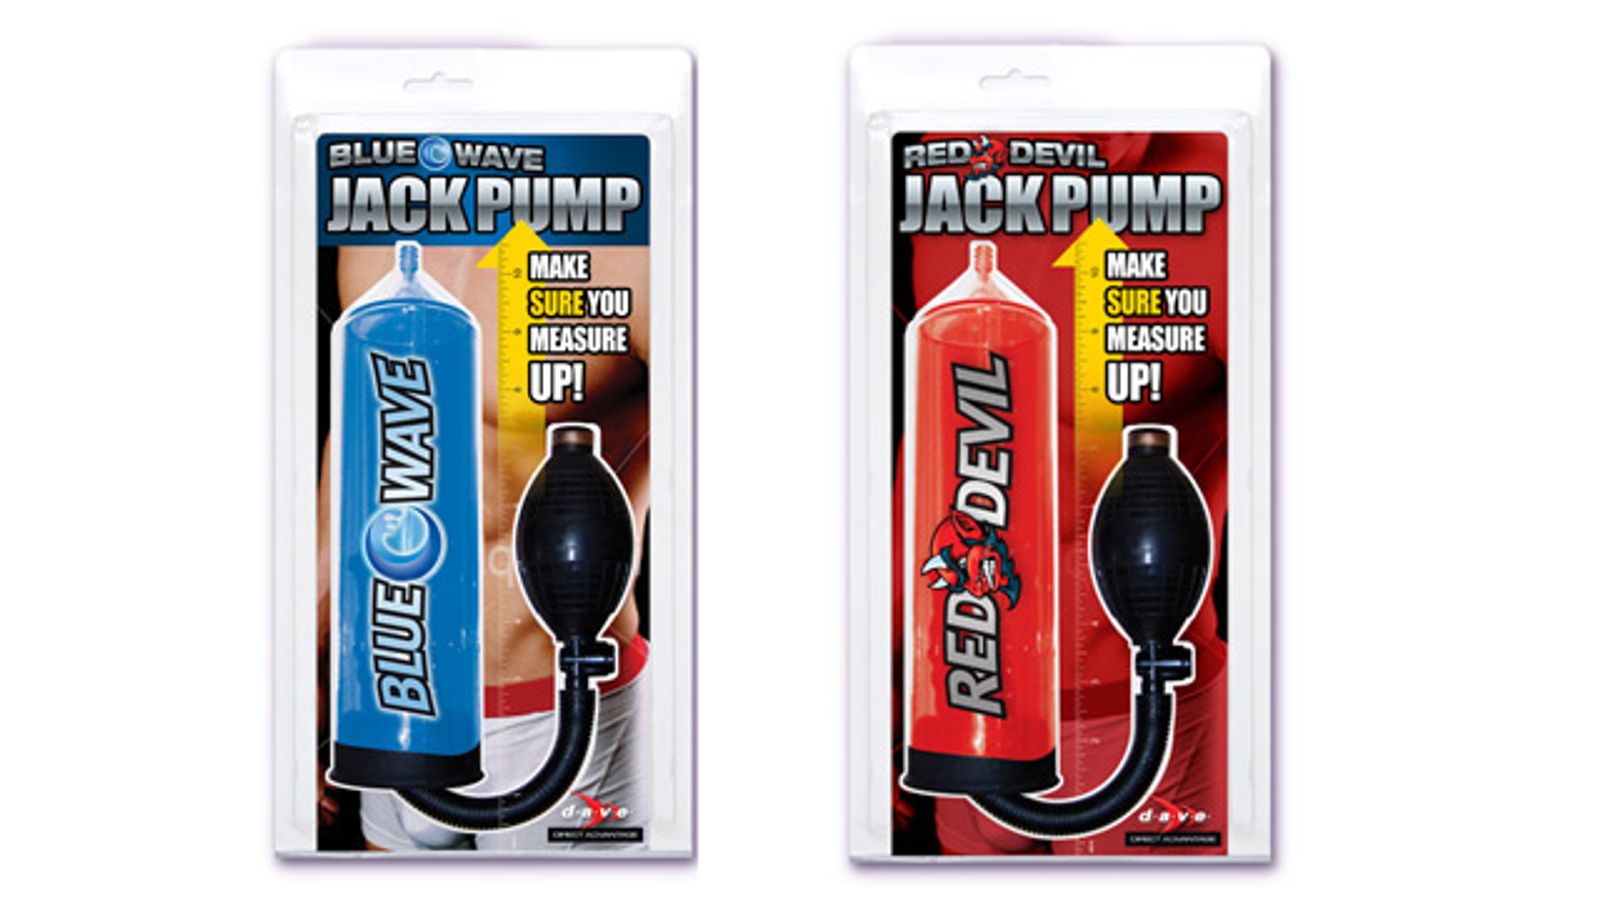 Make Pumping His Routine With Direct Advantage's Jack Pump